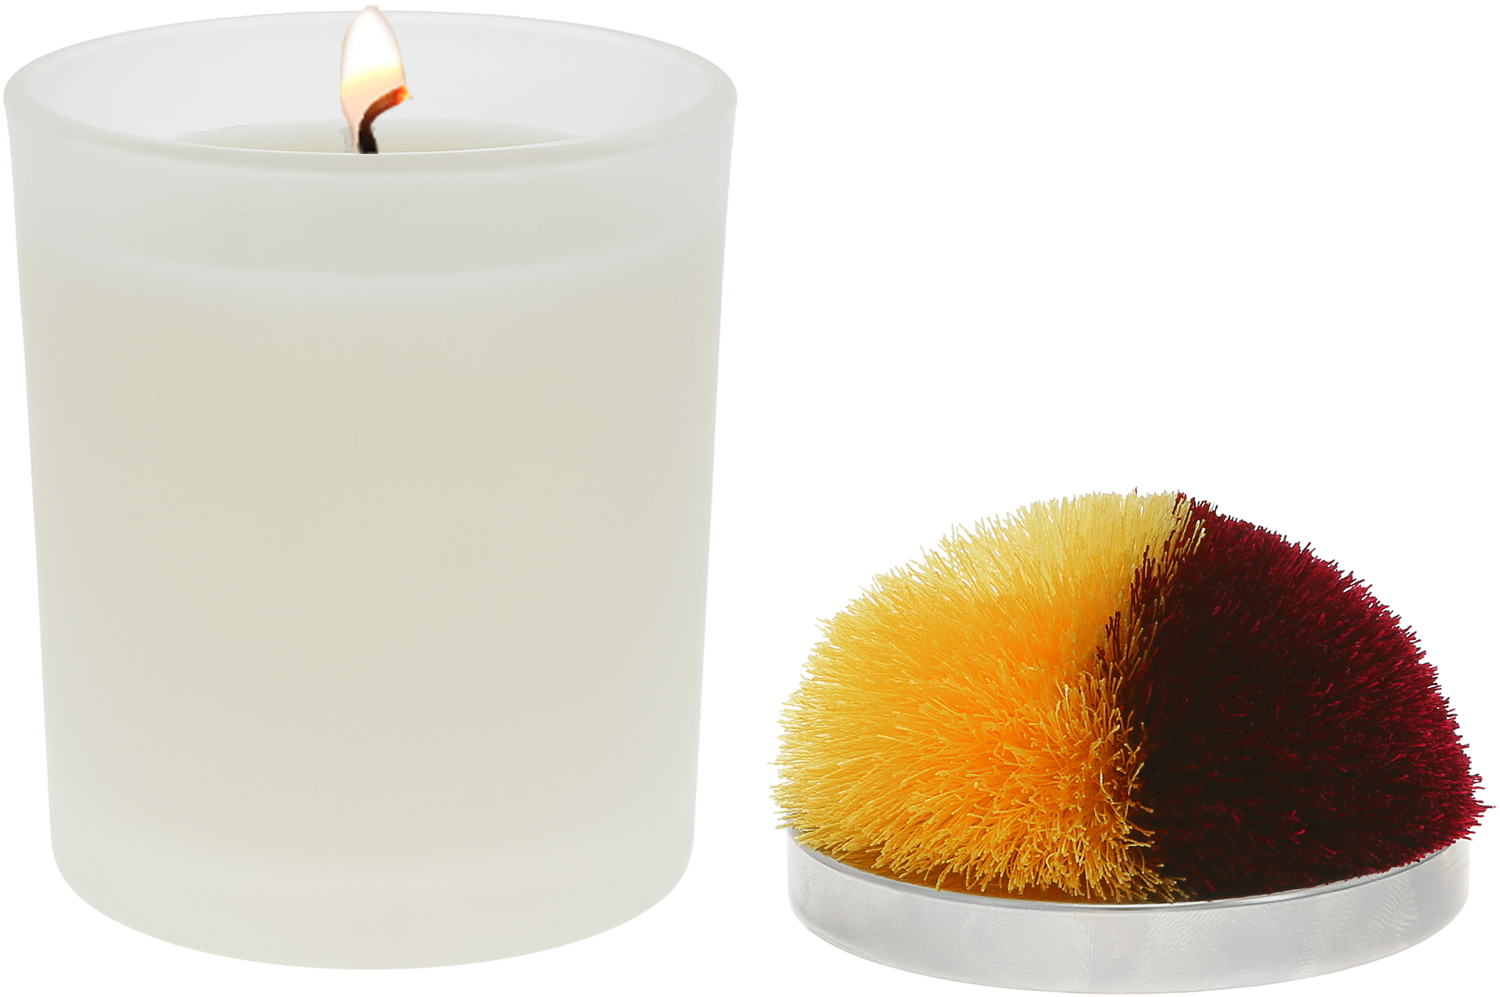 Blank - Maroon & Yellow by Repre-Scent - Blank - Maroon & Yellow - 5.5 oz - 100% Soy Wax Candle with Pom Pom Lid
Scent: Tranquility